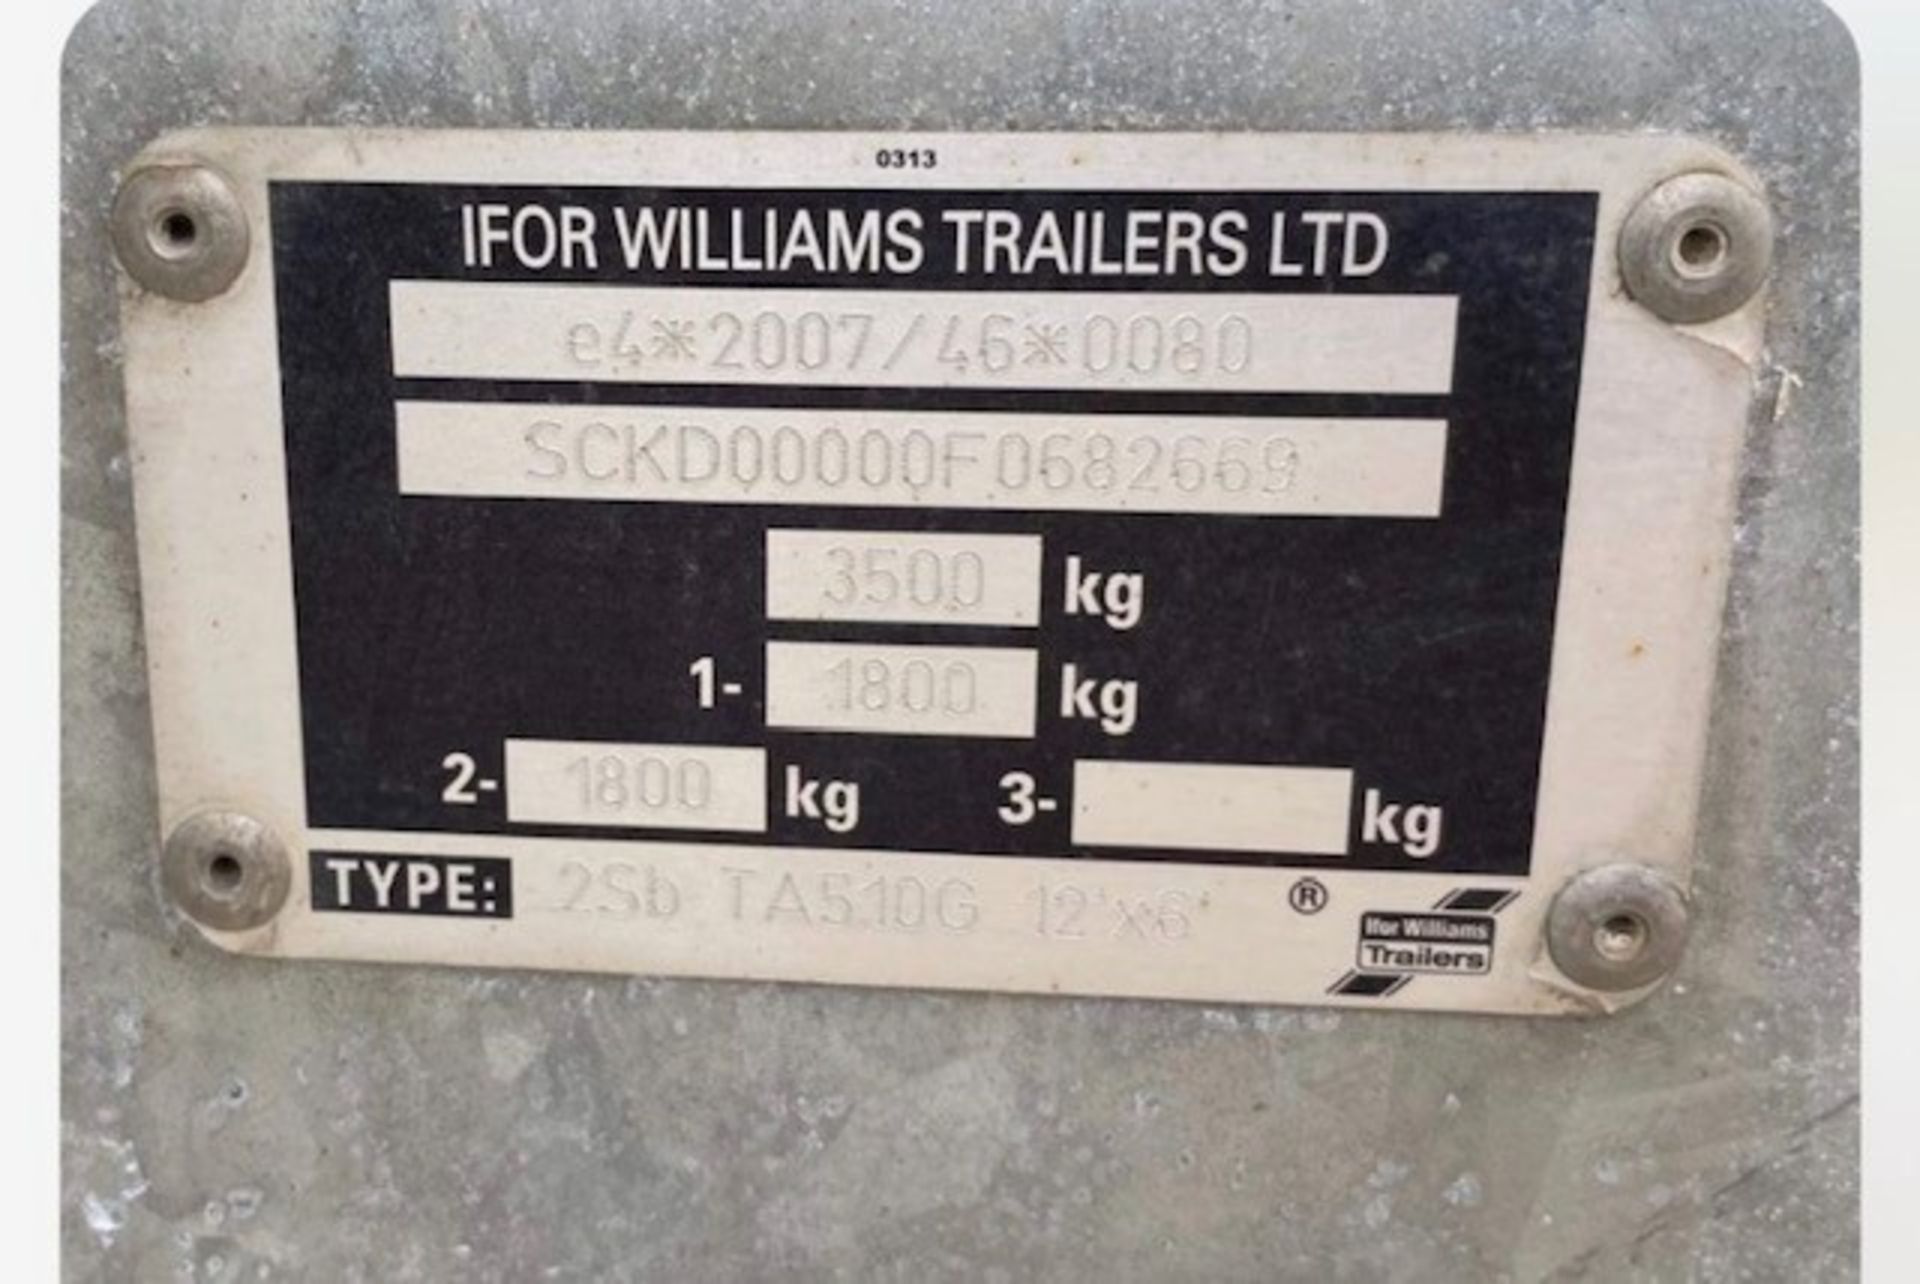 IFOR WILLIAMS 12' X 6' STOCK TRAILER - Image 2 of 3